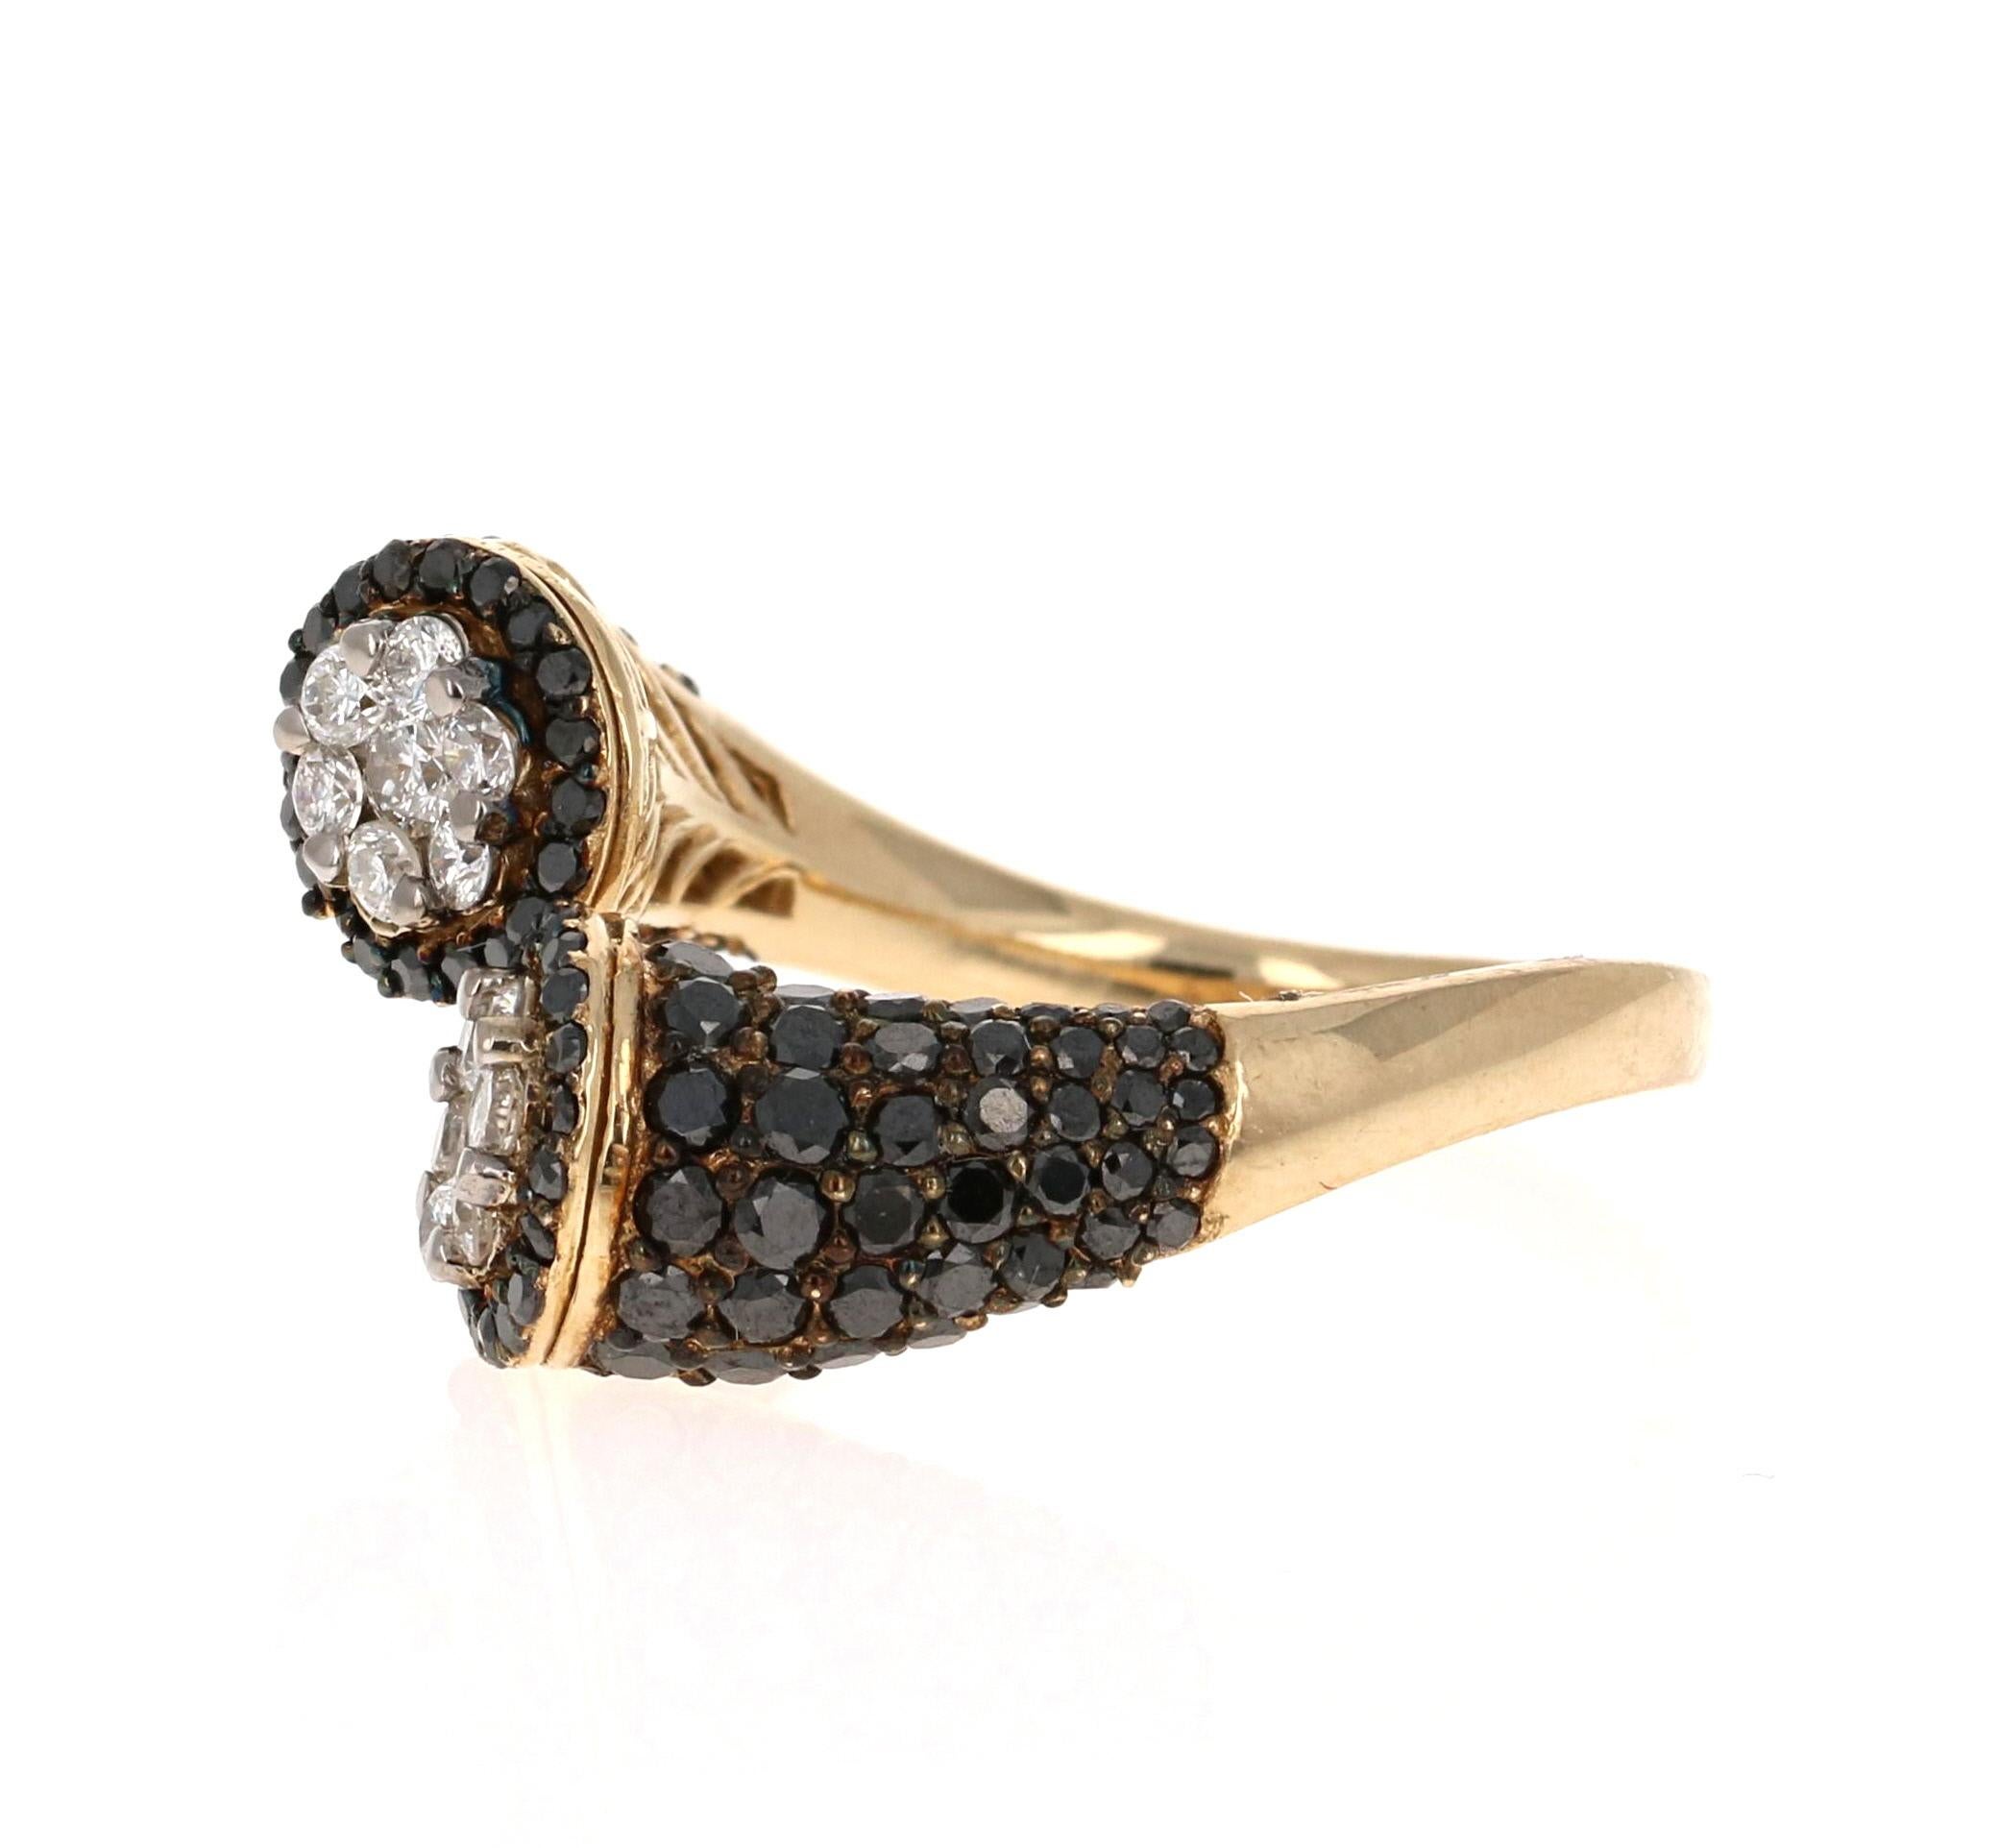 This gorgeous Yellow Gold Black Diamond Bridal Ring has been uniquely designed using Round Cut Black and White Diamonds that weigh a total of 2.08 Carats. The ring has 14 White Diamonds weighing 0.45 Carats (Clarity: SI, Color: F) which are designed